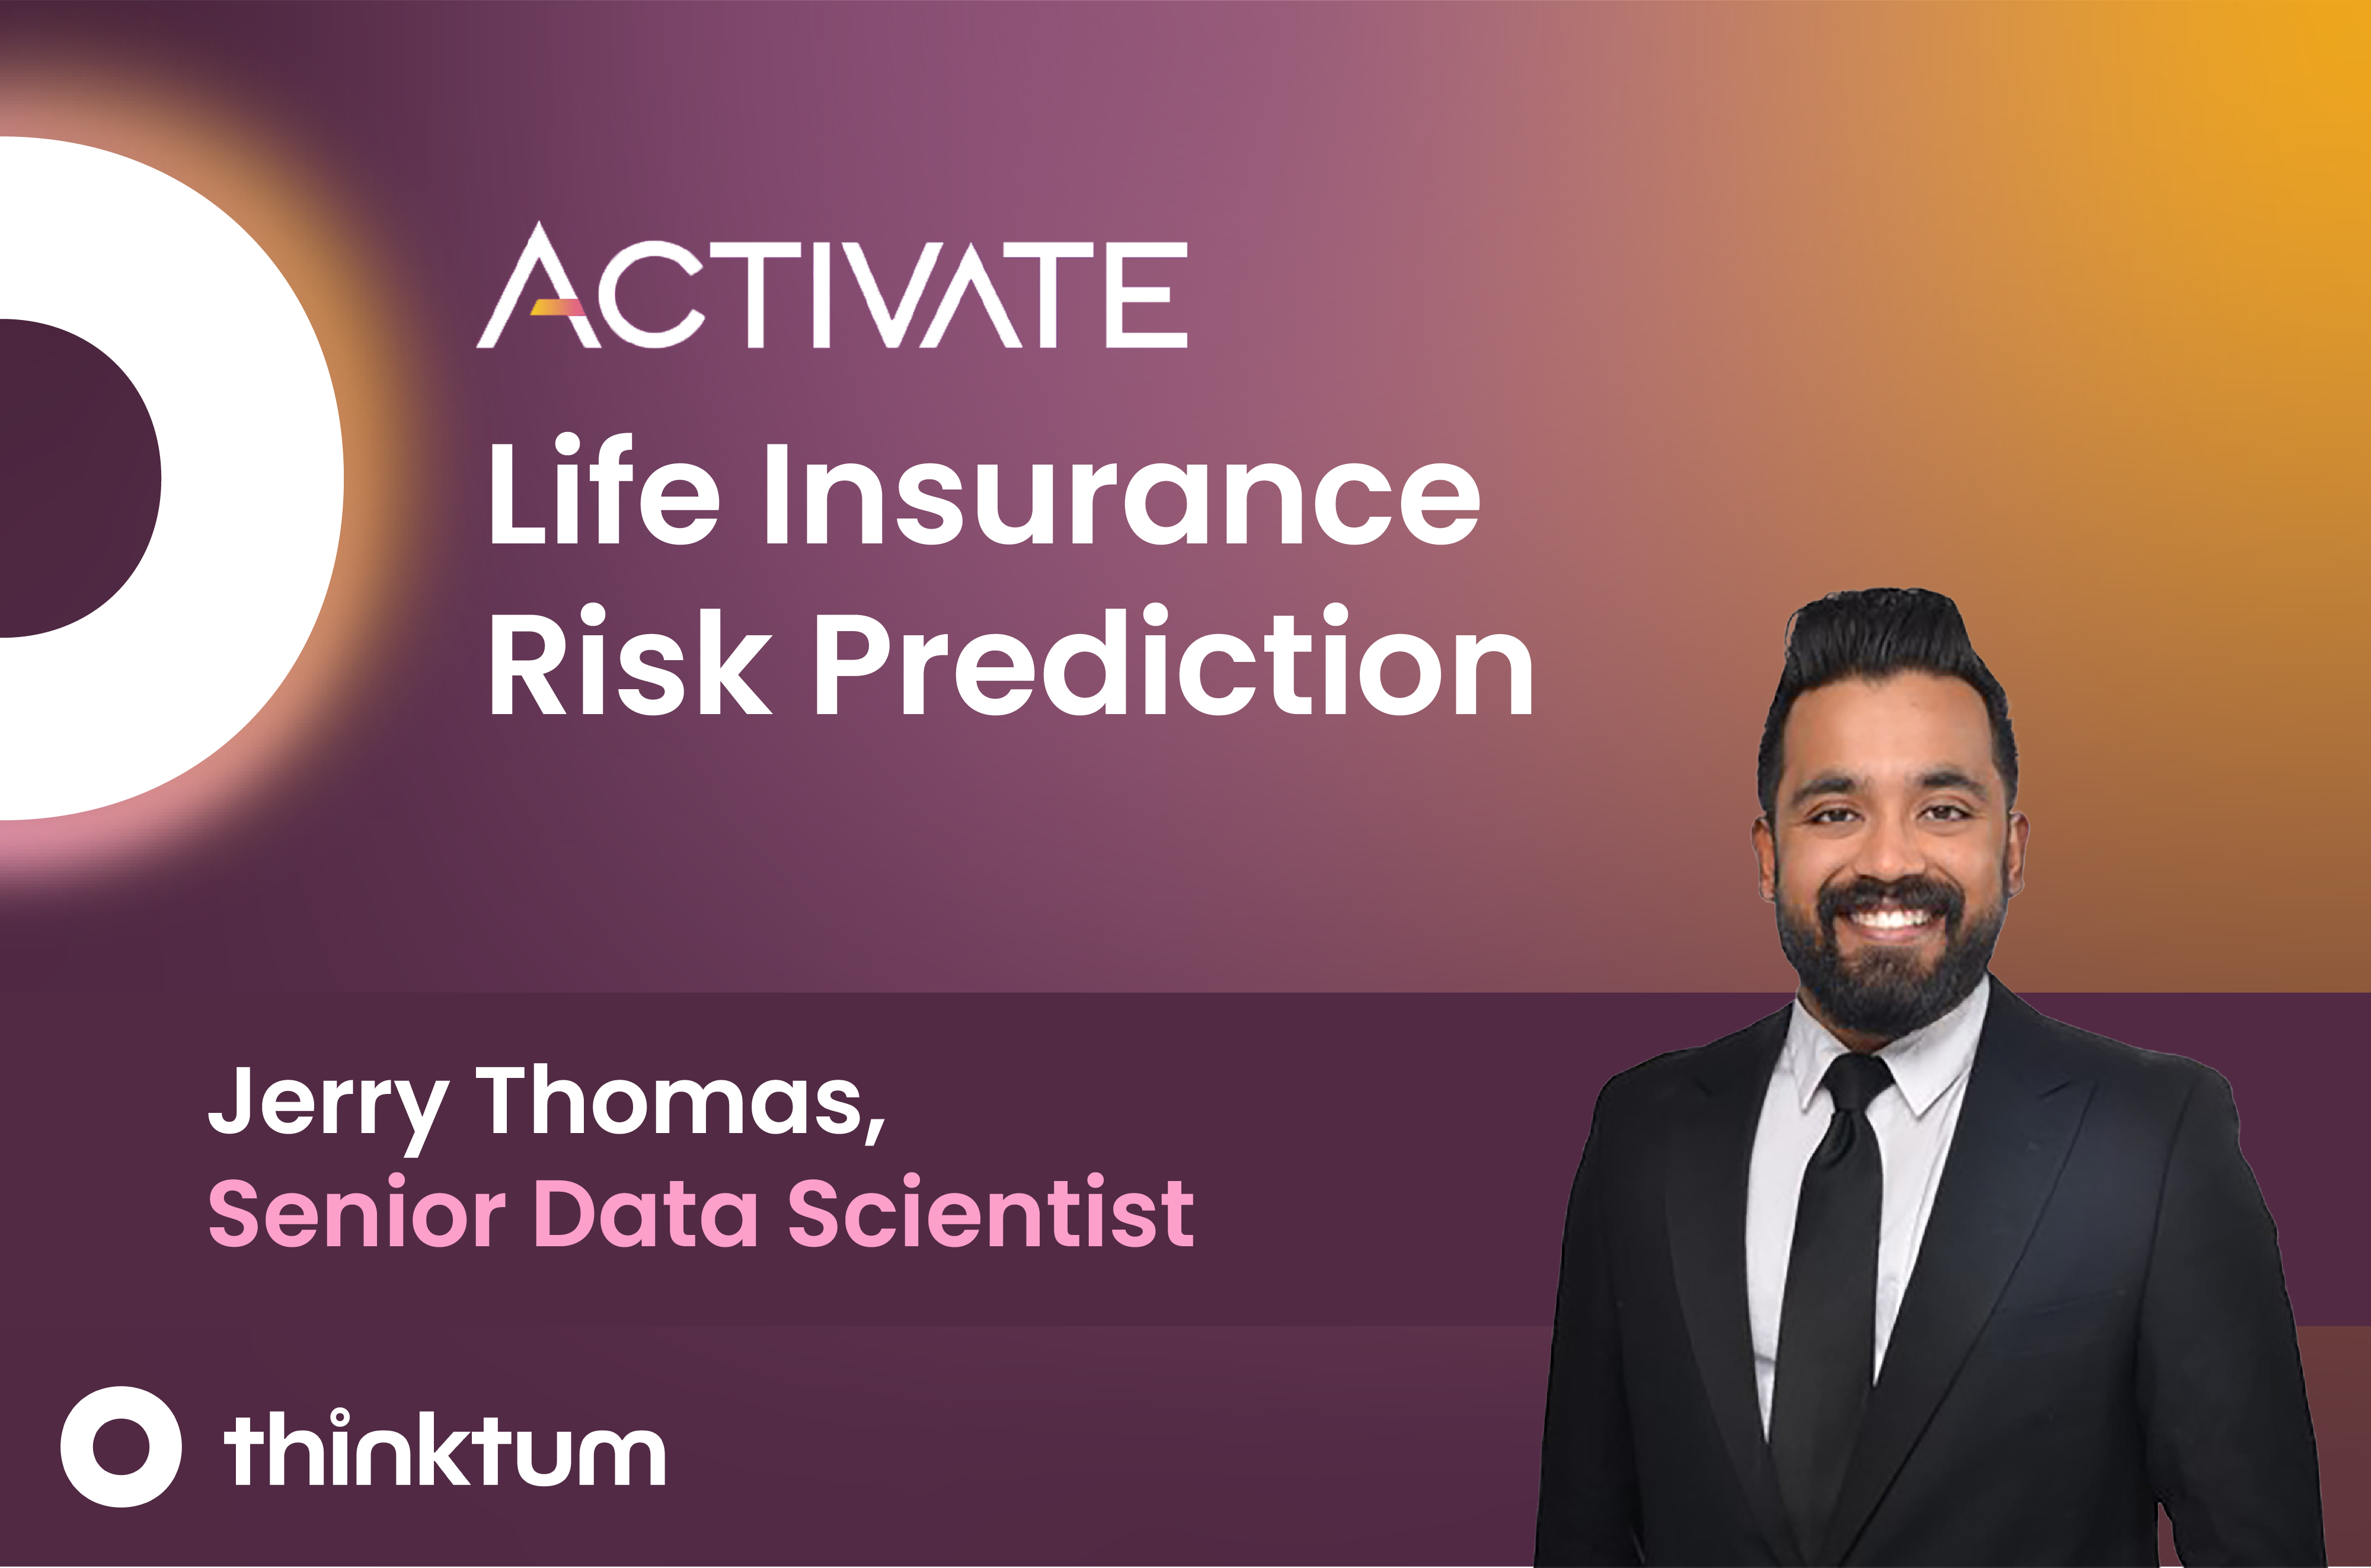 A purple background shows the Activate logo with Life Insurance Risk Prediction and Jerry Thomas (with photo) and the thinktum logo.